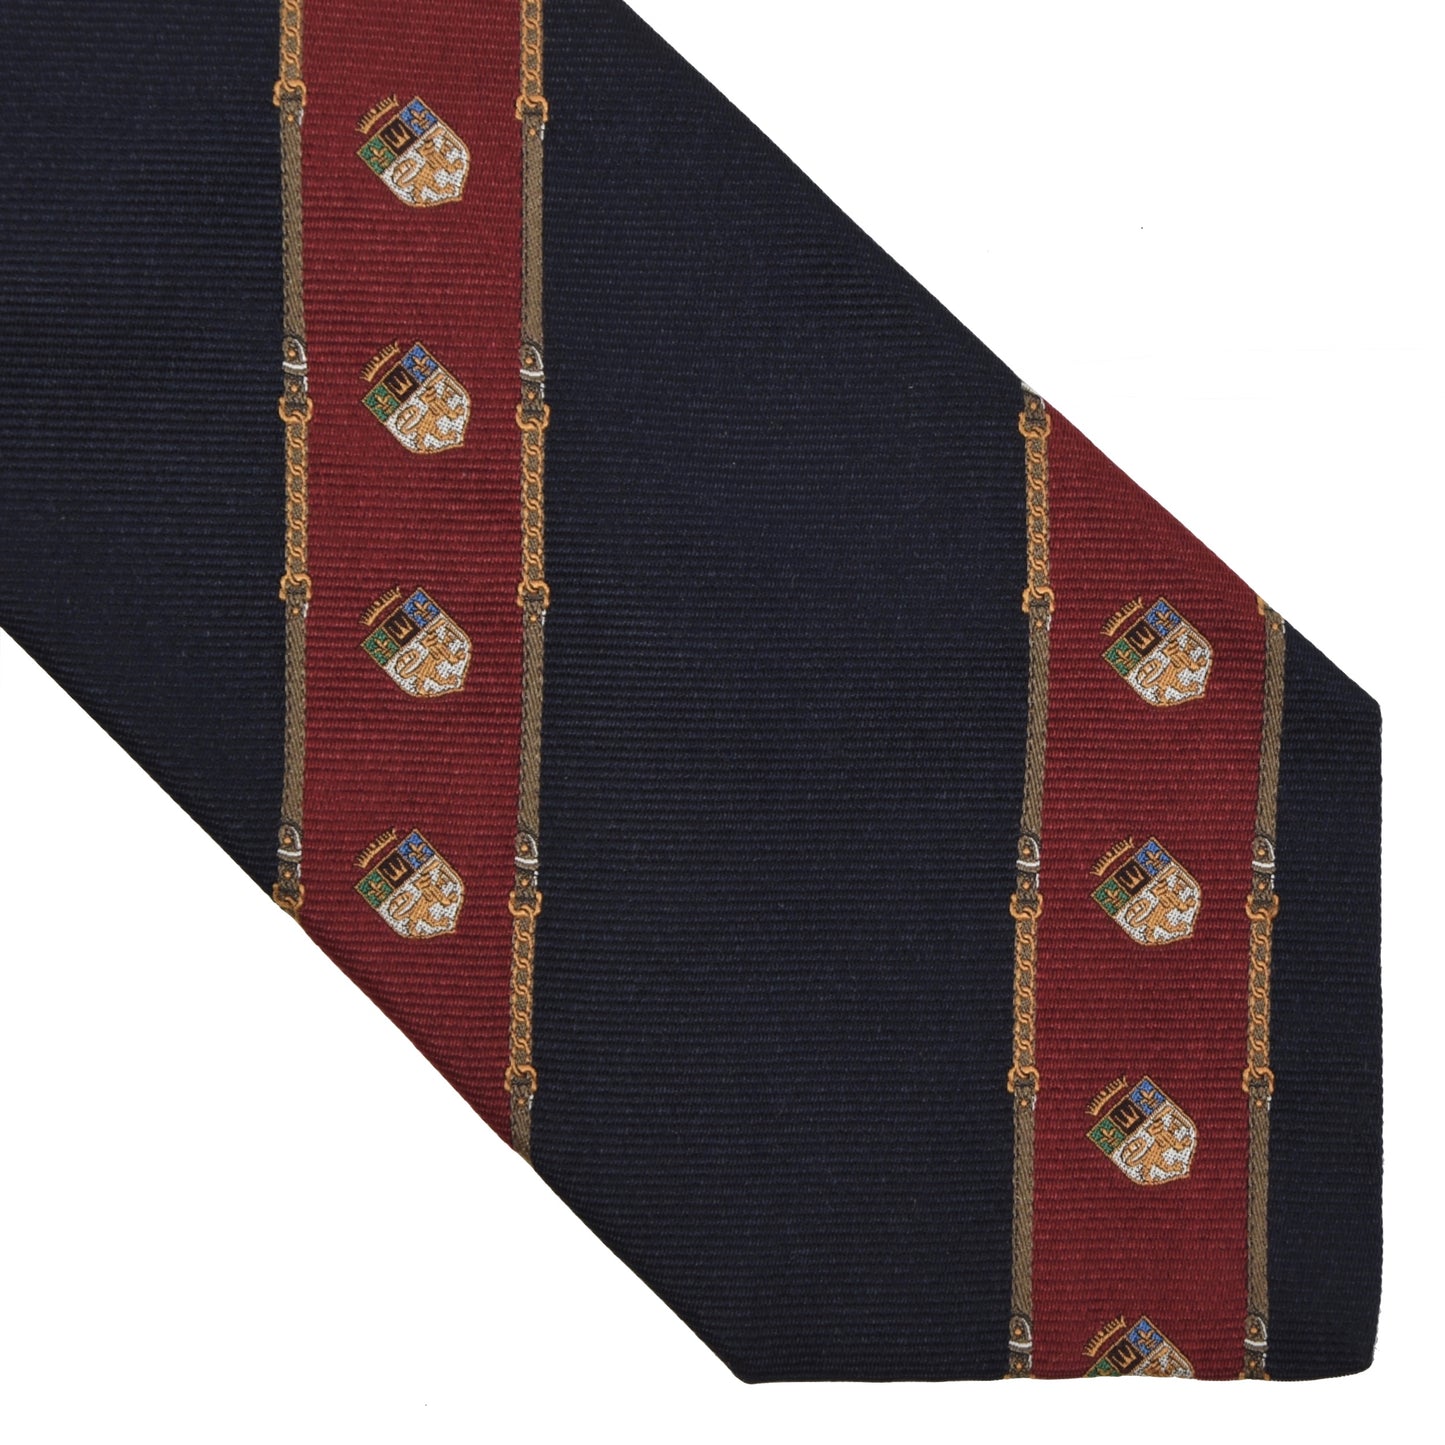 Prochownick Striped Silk Tie Coat of Arms - Navy & Red